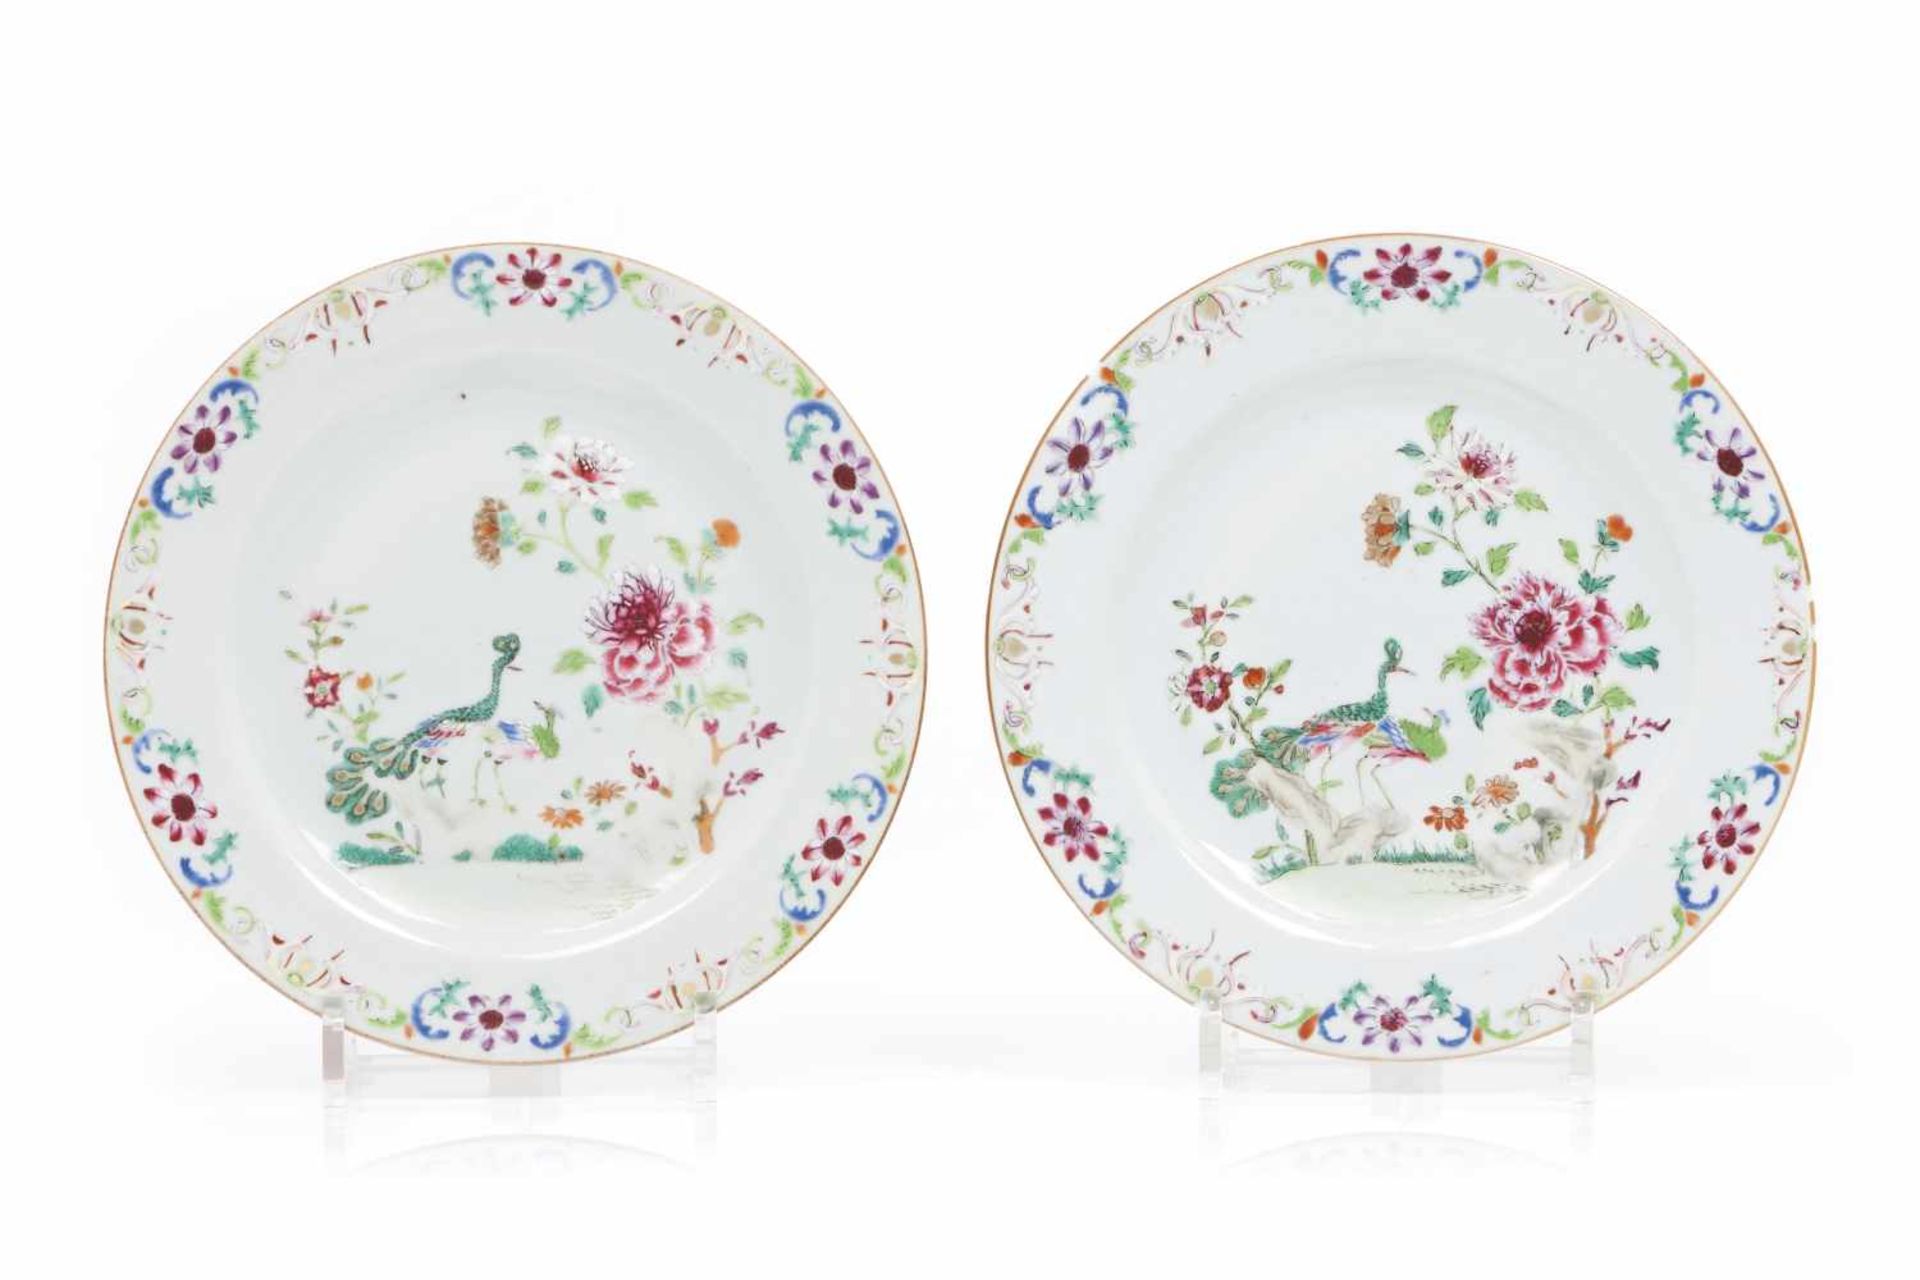 A pair of platesChinese export porcelain"Famille Rose" enamelled decoration with garden and